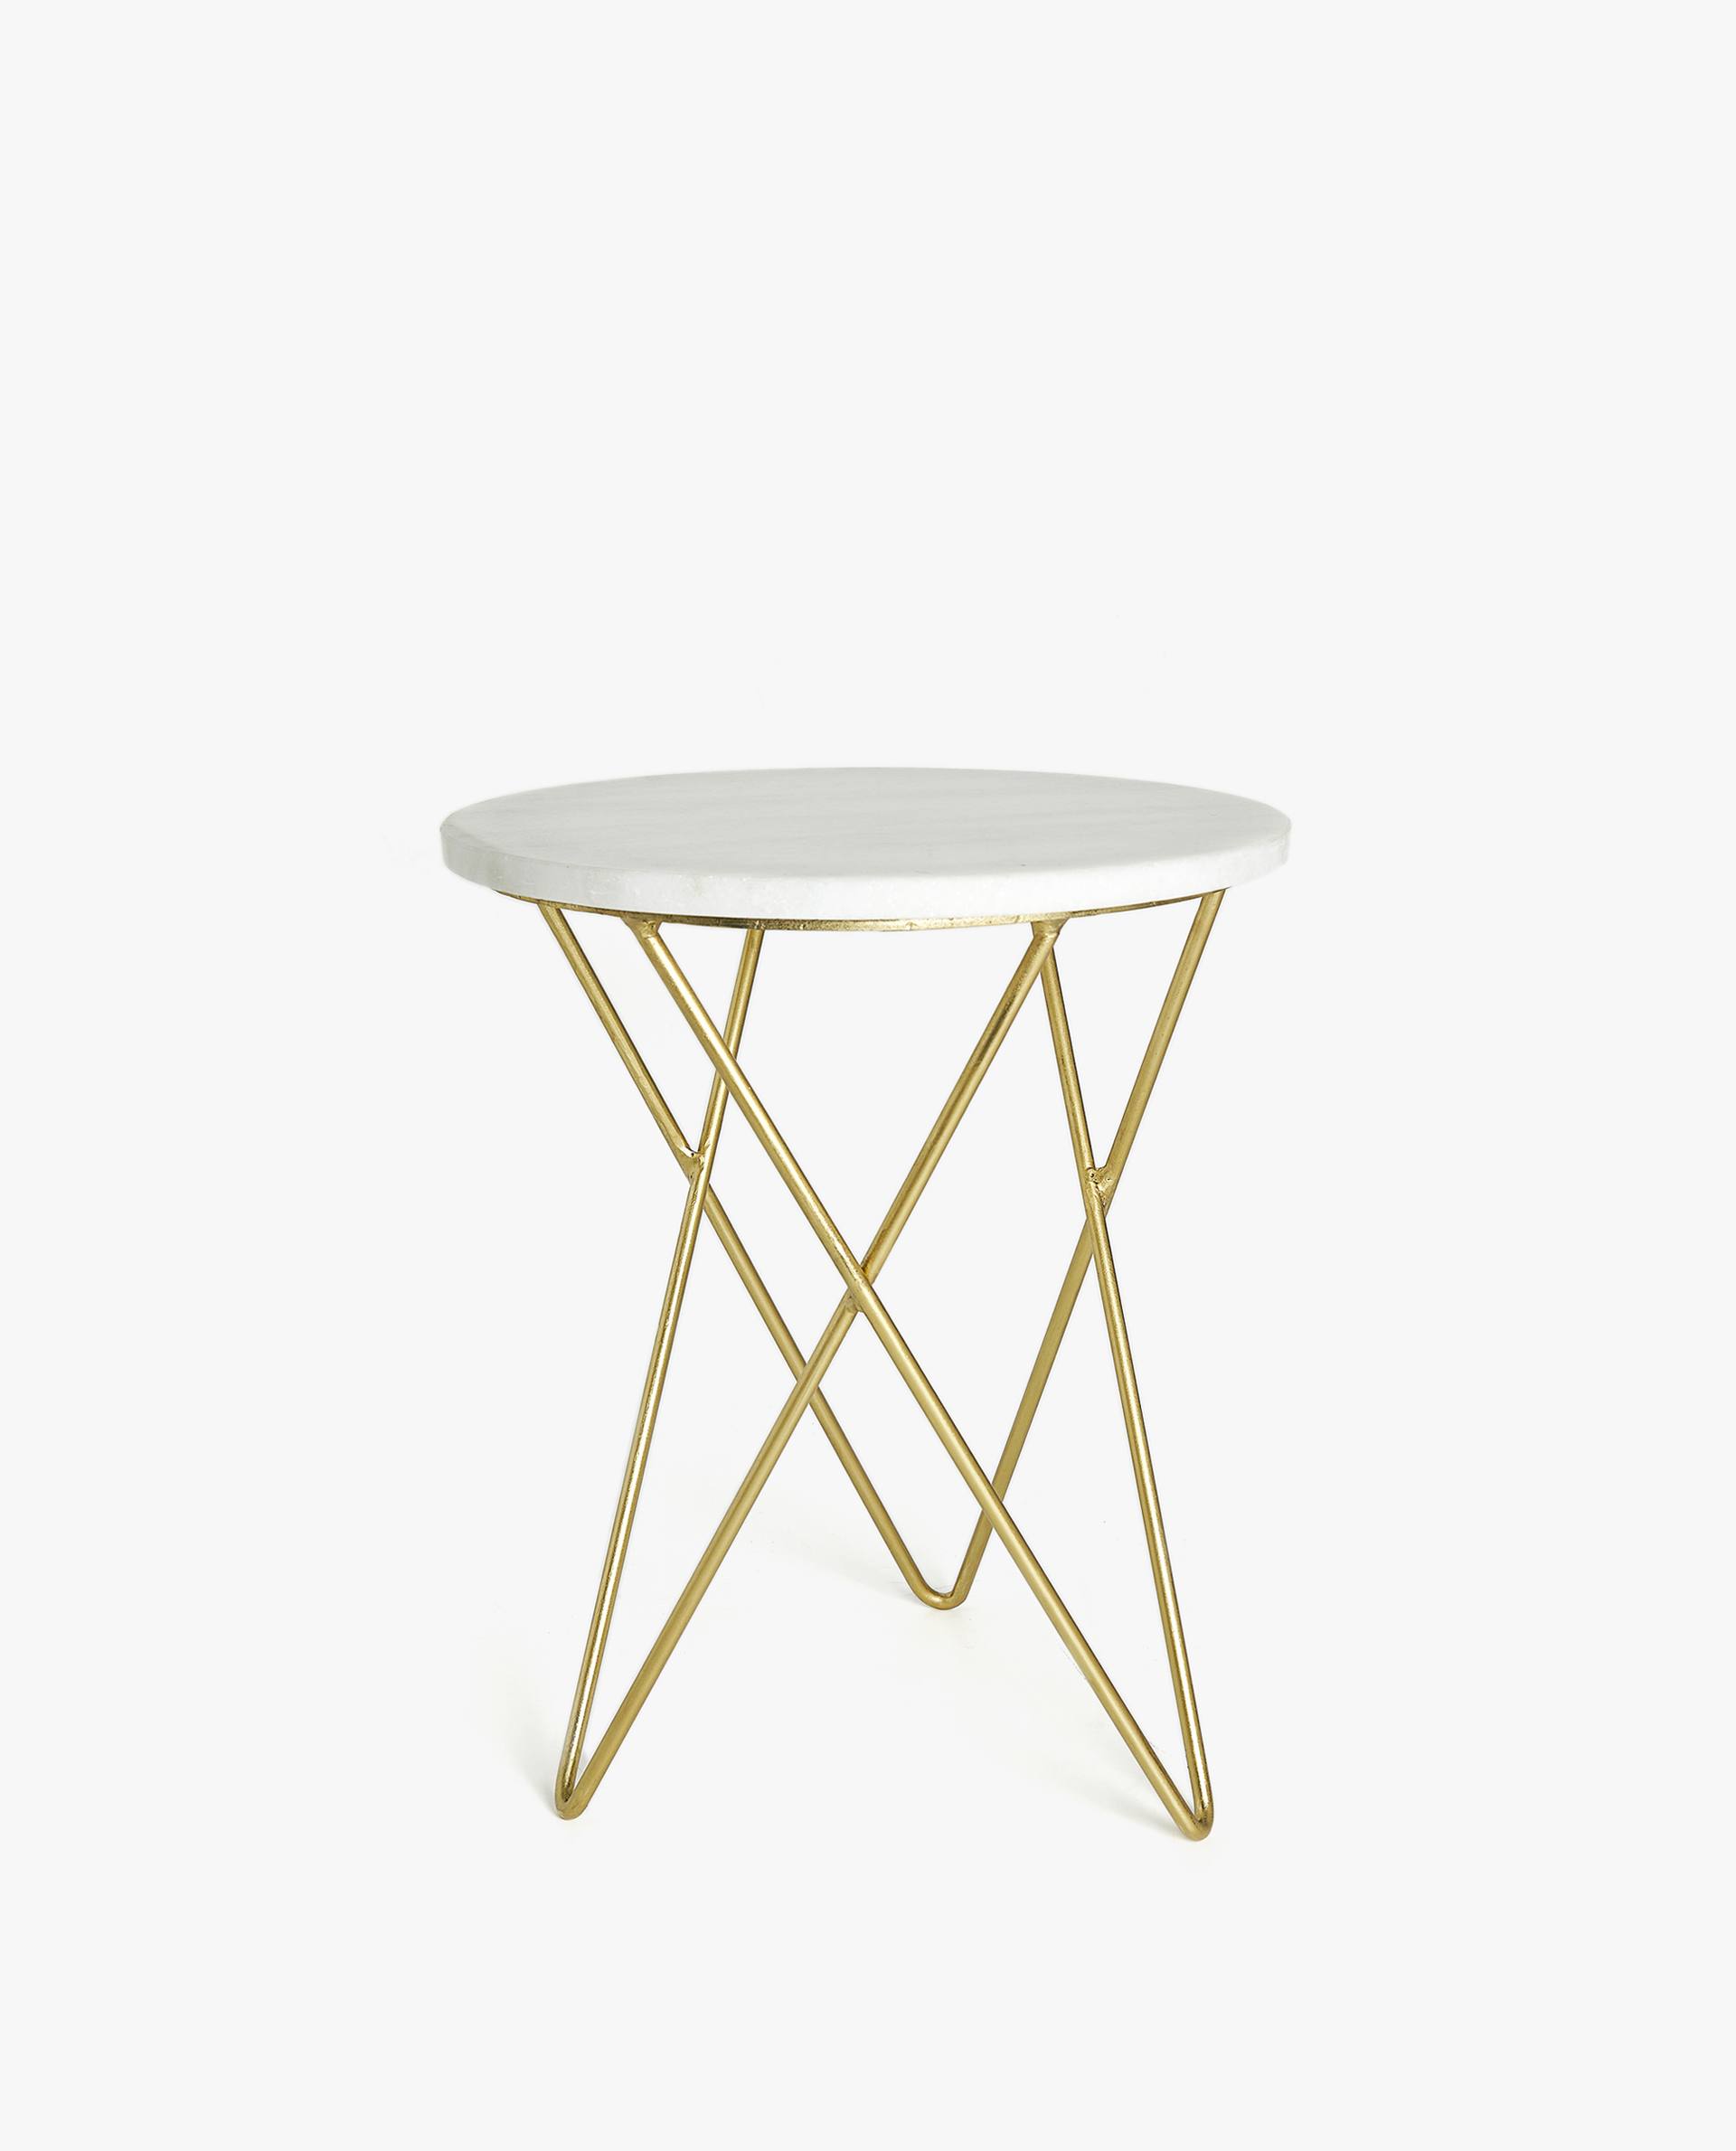 + MARBLE TABLE